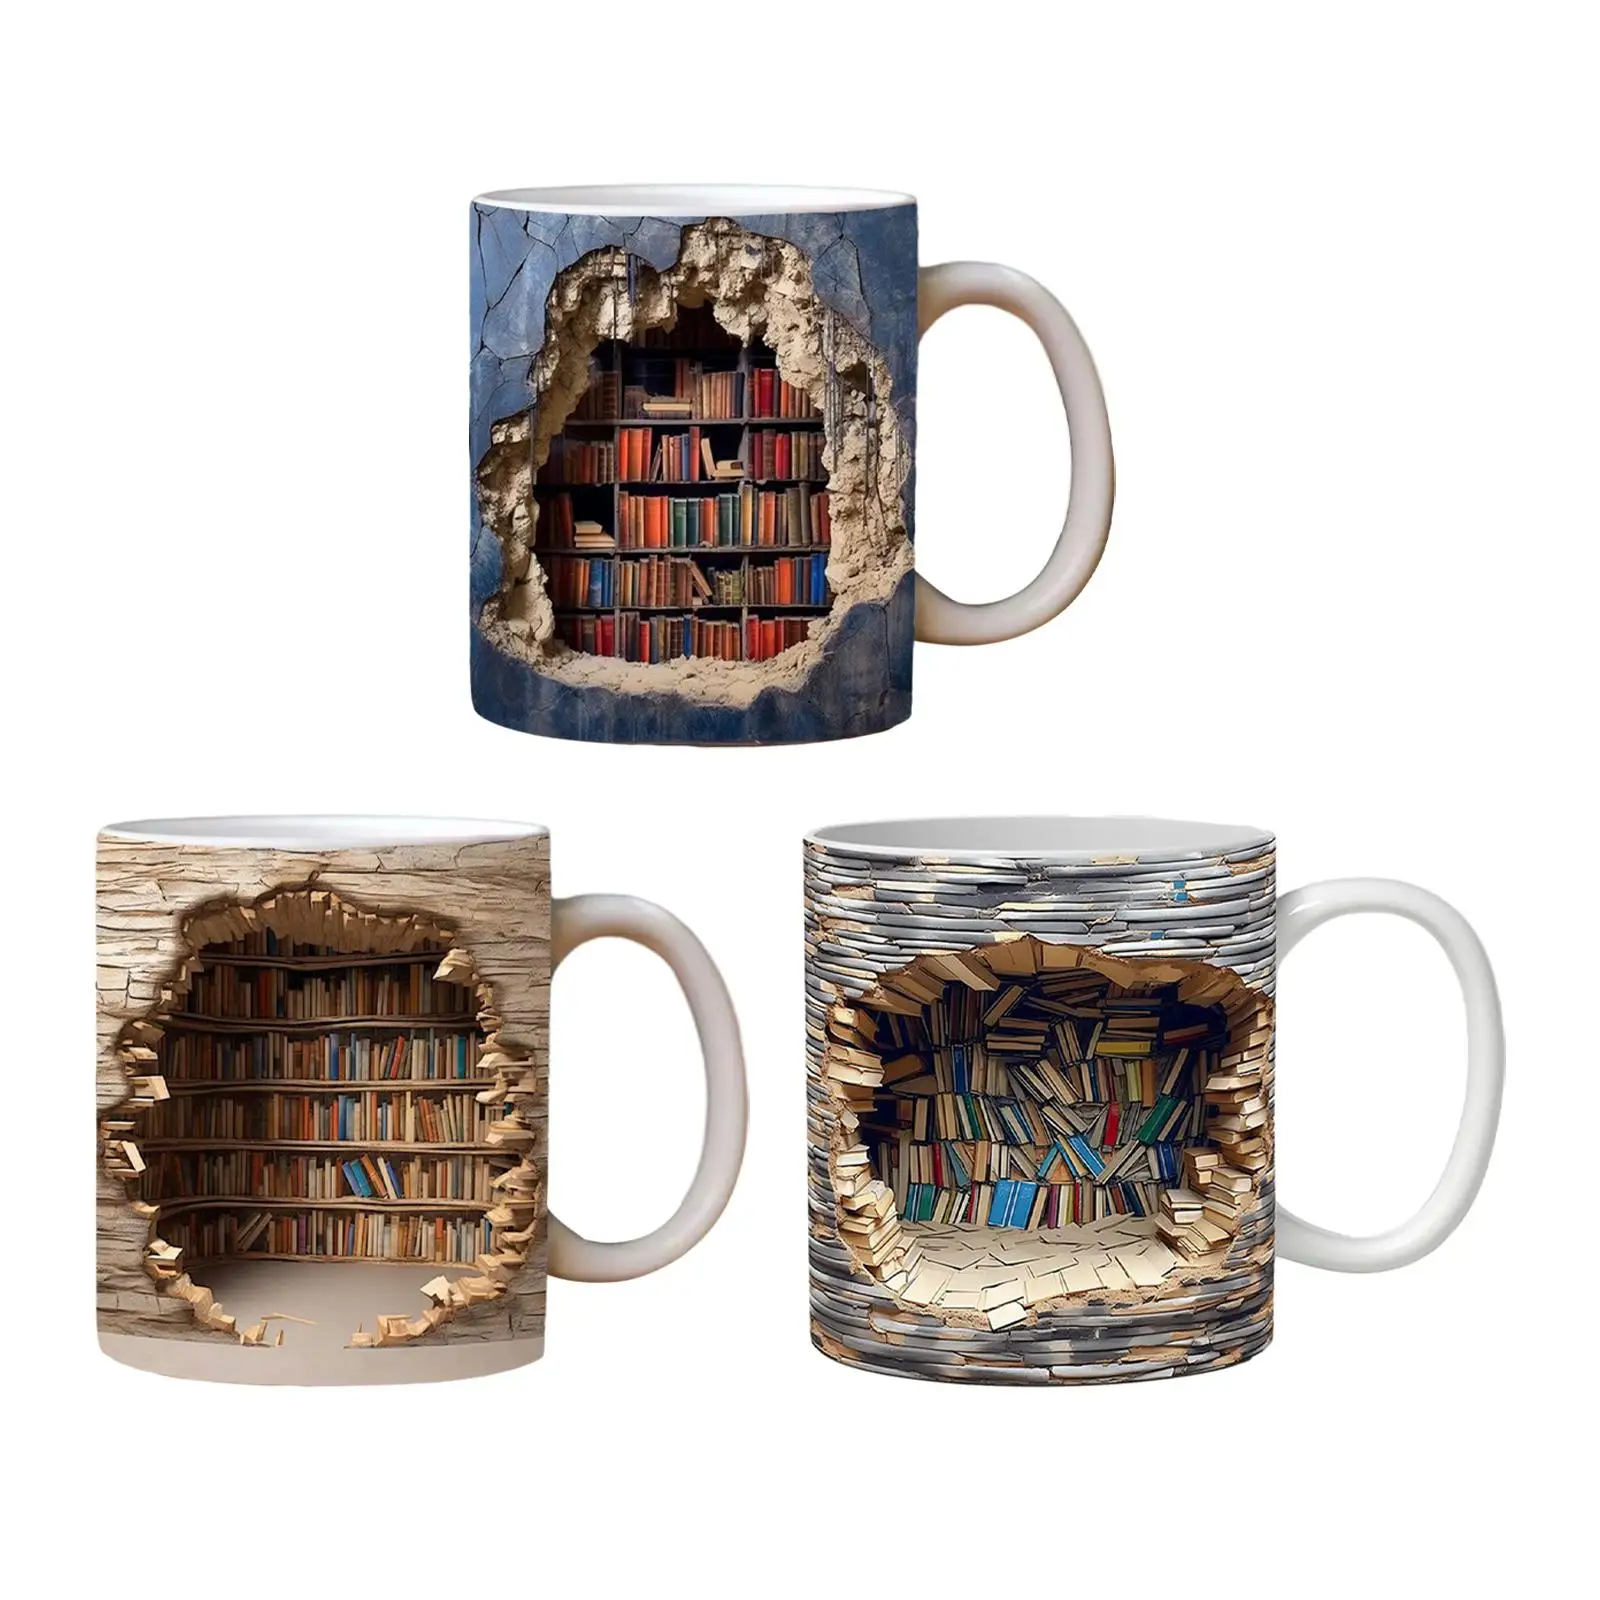 Bookworm Coffee Mug Porcelain Cup for Office and Book Club Drinking Cup